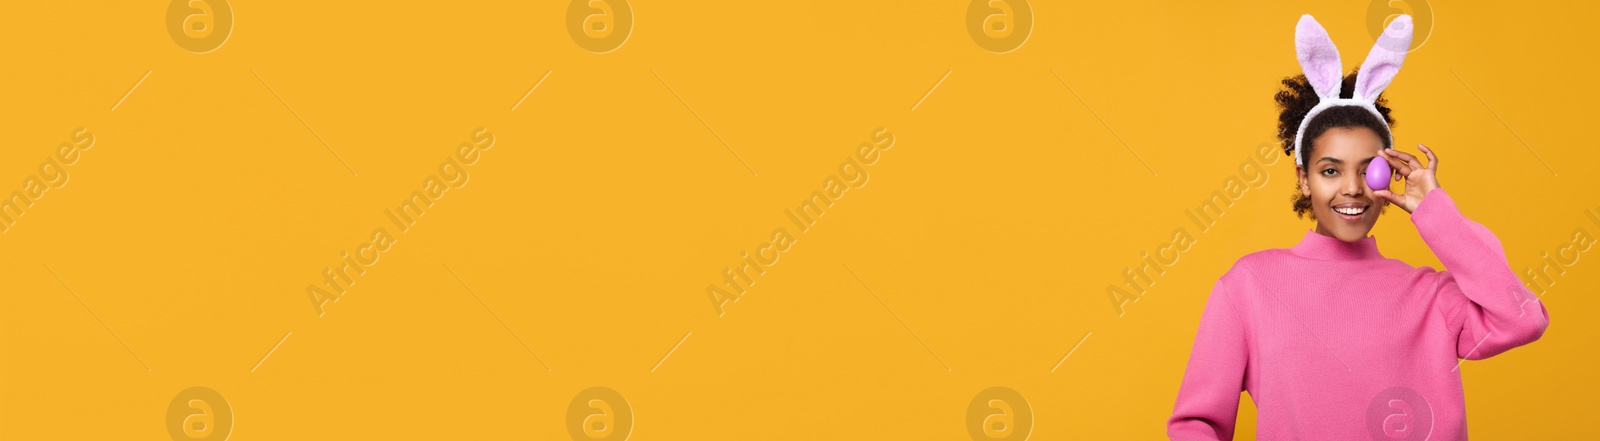 Image of Happy African American woman with bunny ears holding Easter egg near eye on orange background, space for text. Banner design